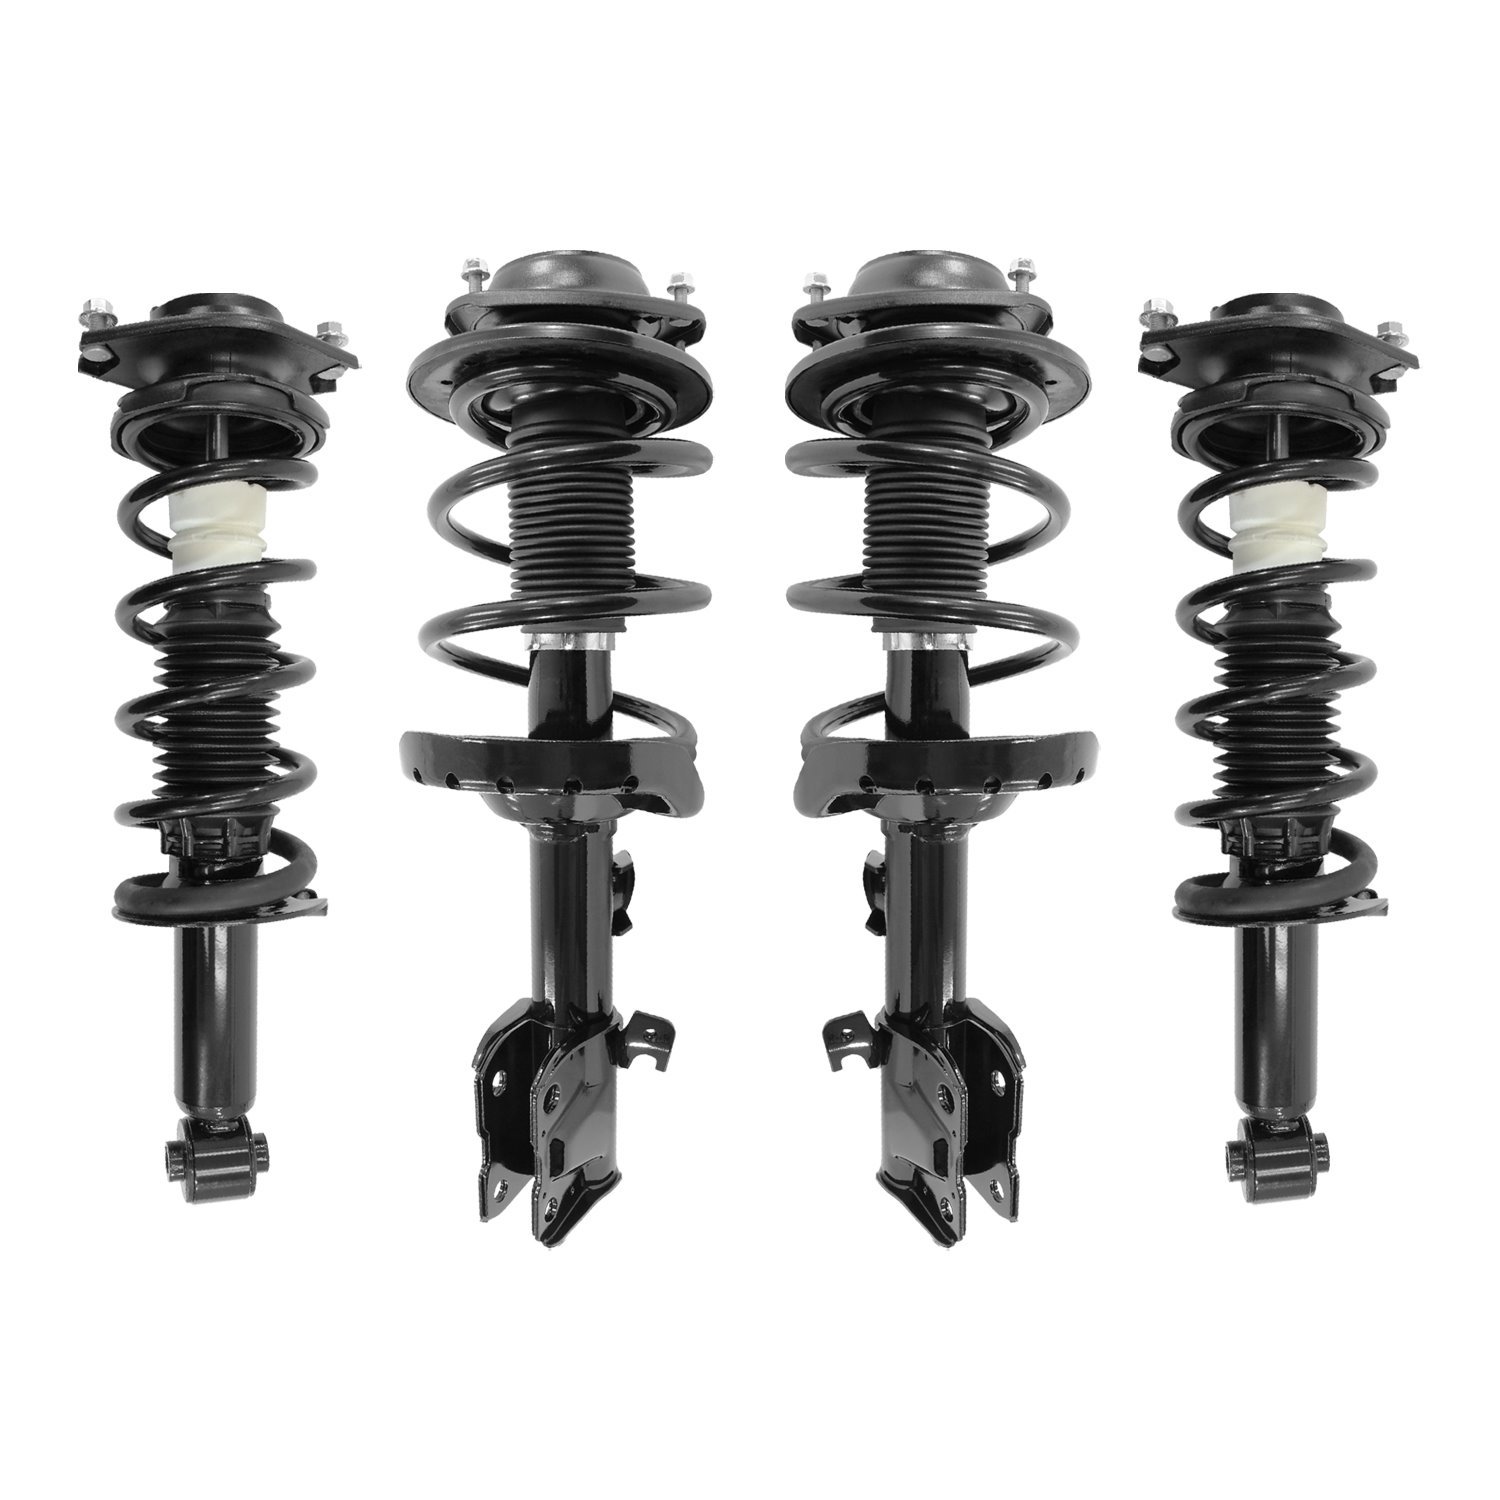 4-13381-16130-001 Front & Rear Suspension Strut & Coil Spring Assembly Kit Fits Select Subaru Legacy